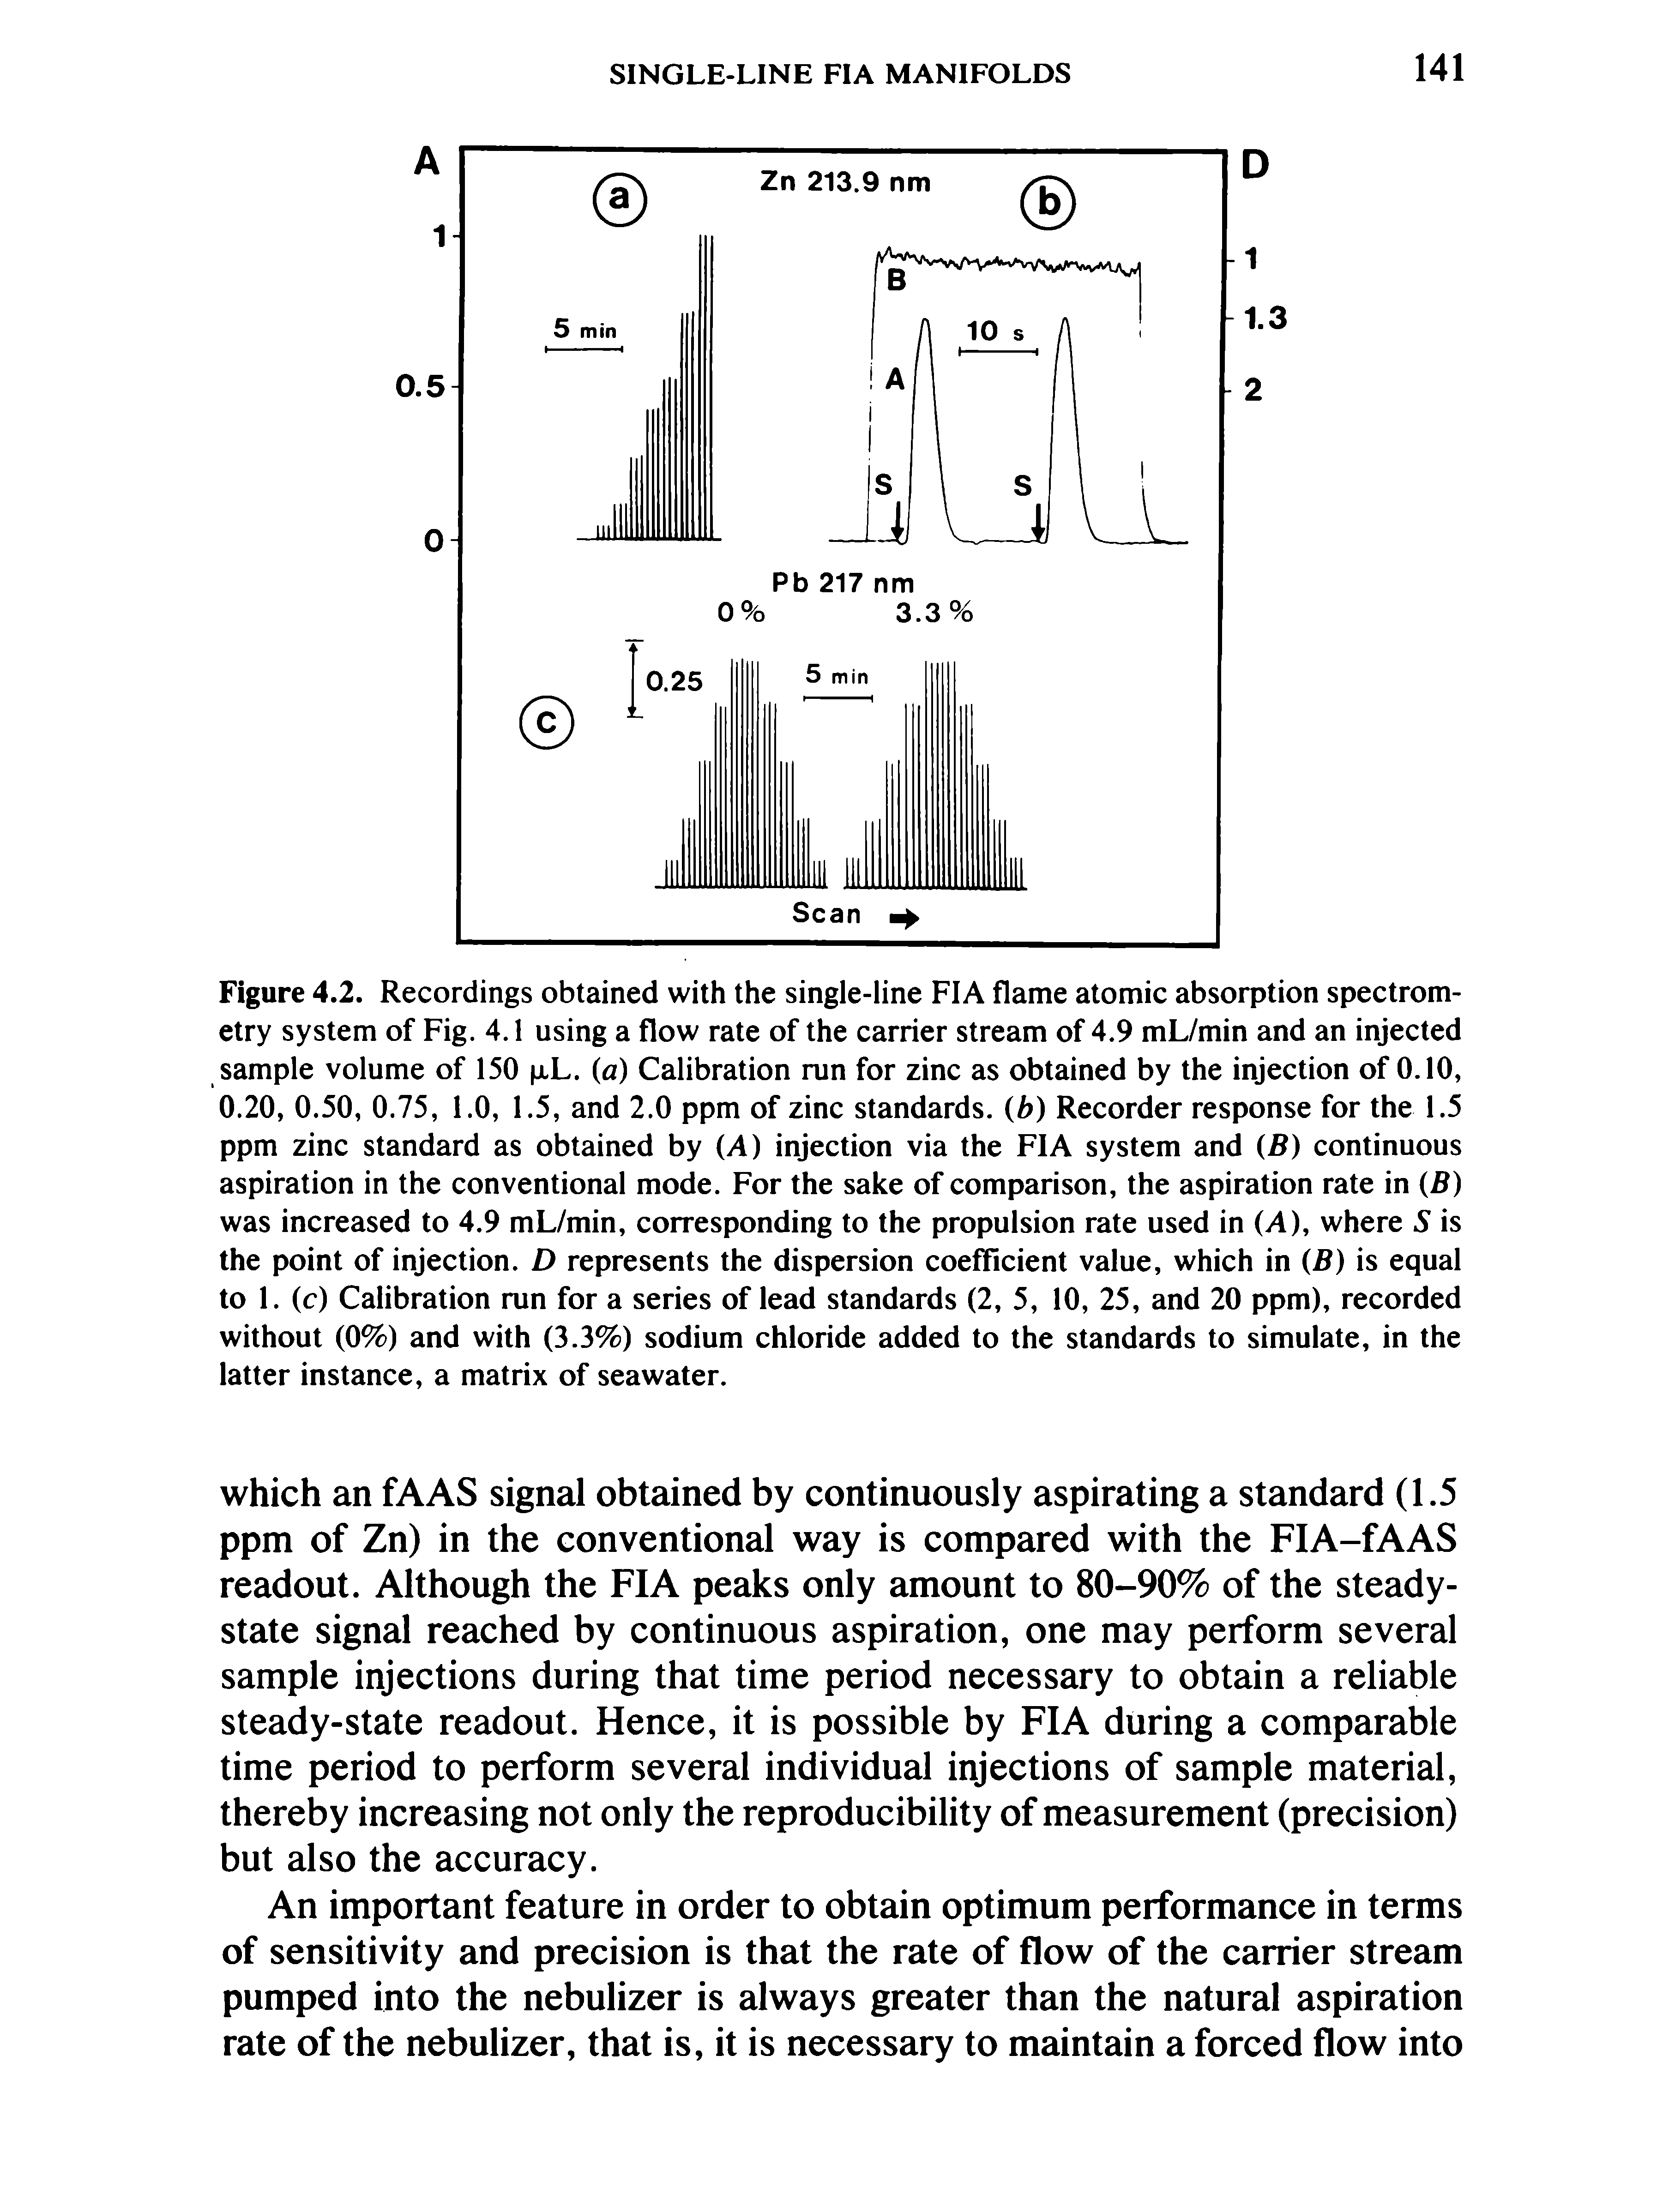 Figure 4.2. Recordings obtained with the single-line FIA flame atomic absorption spectrometry system of Fig. 4.1 using a flow rate of the carrier stream of 4.9 mL/min and an injected sample volume of 150 jlL. (a) Calibration run for zinc as obtained by the injection of 0.10, 0.20, 0.50, 0.75, 1.0, 1.5, and 2.0 ppm of zinc standards, (b) Recorder response for the 1.5 ppm zinc standard as obtained by (A) injection via the FIA system and (B) continuous aspiration in the conventional mode. For the sake of comparison, the aspiration rate in (R) was increased to 4.9 mL/min, corresponding to the propulsion rate used in (A), where S is the point of injection. D represents the dispersion coefficient value, which in (B) is equal to 1. (c) Calibration run for a series of lead standards (2, 5, 10, 25, and 20 ppm), recorded without (0%) and with (3.3%) sodium chloride added to the standards to simulate, in the latter instance, a matrix of seawater.